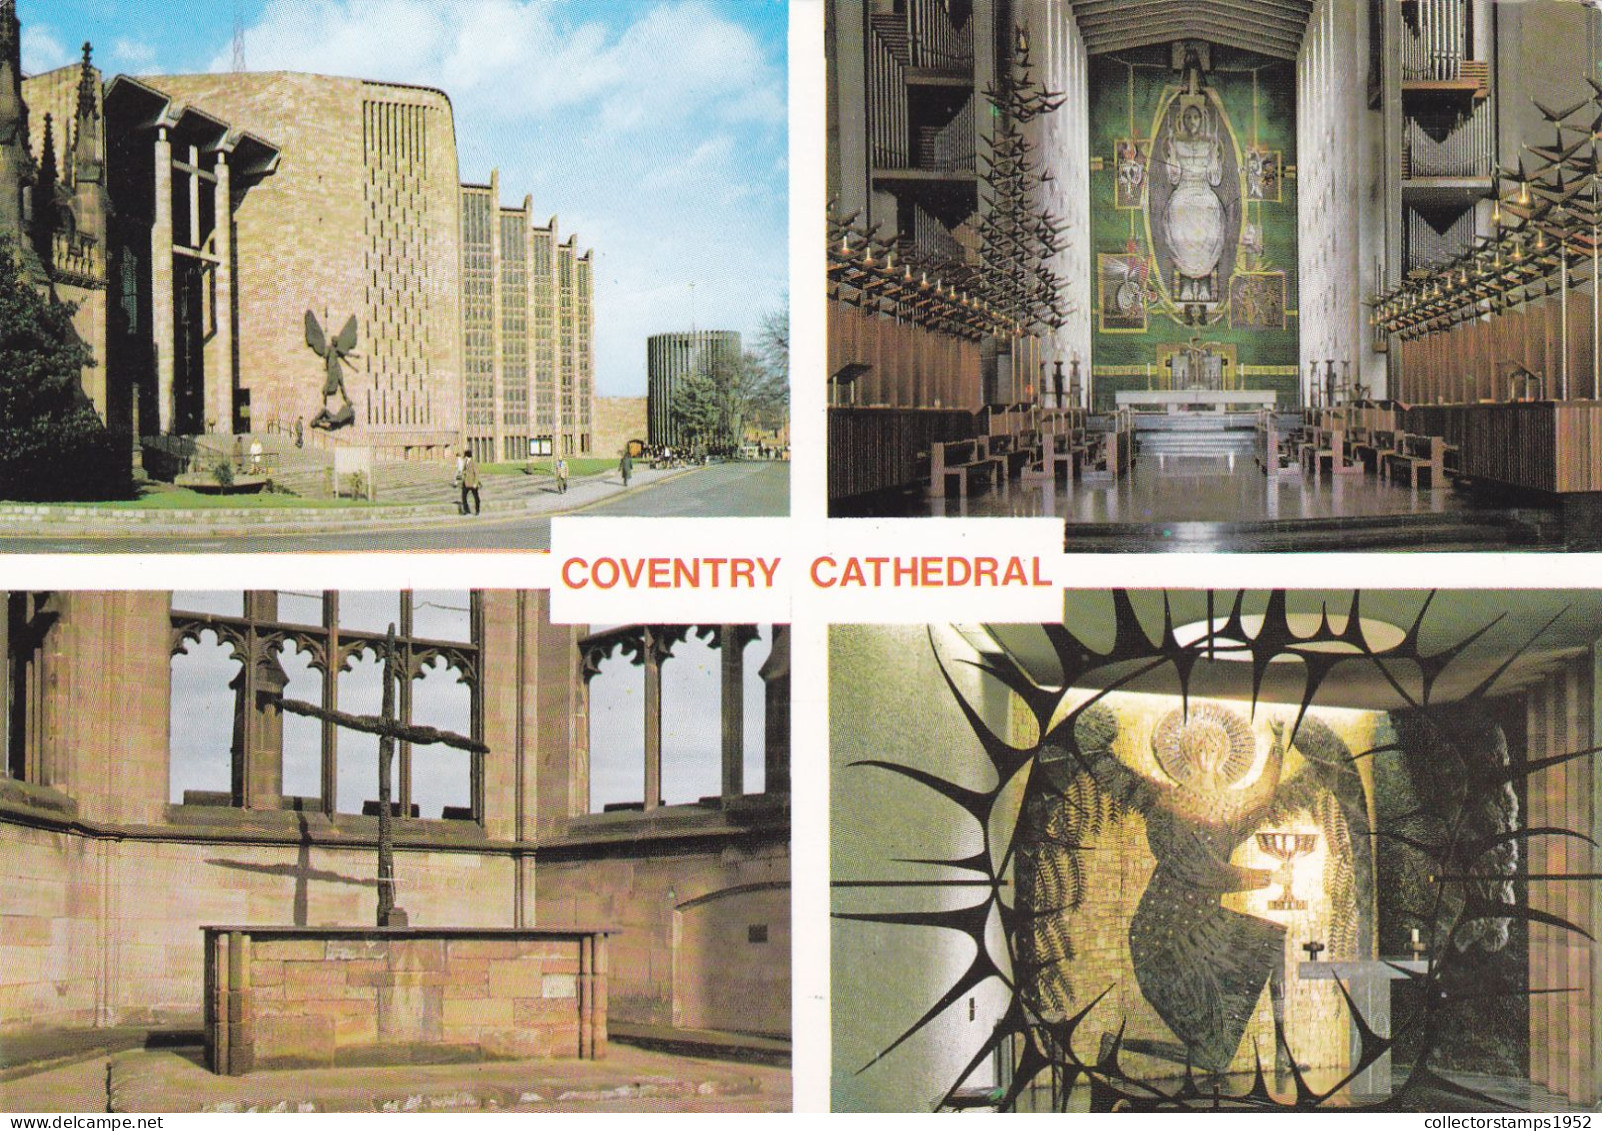 THE CATHEDRAL, CHOIR SANCTUARY, ALTAR OF RECONCILIATION, GETHSEMANE CHAPEL, CONVENTY, CHURCH, UNITED KINGDOM - Coventry